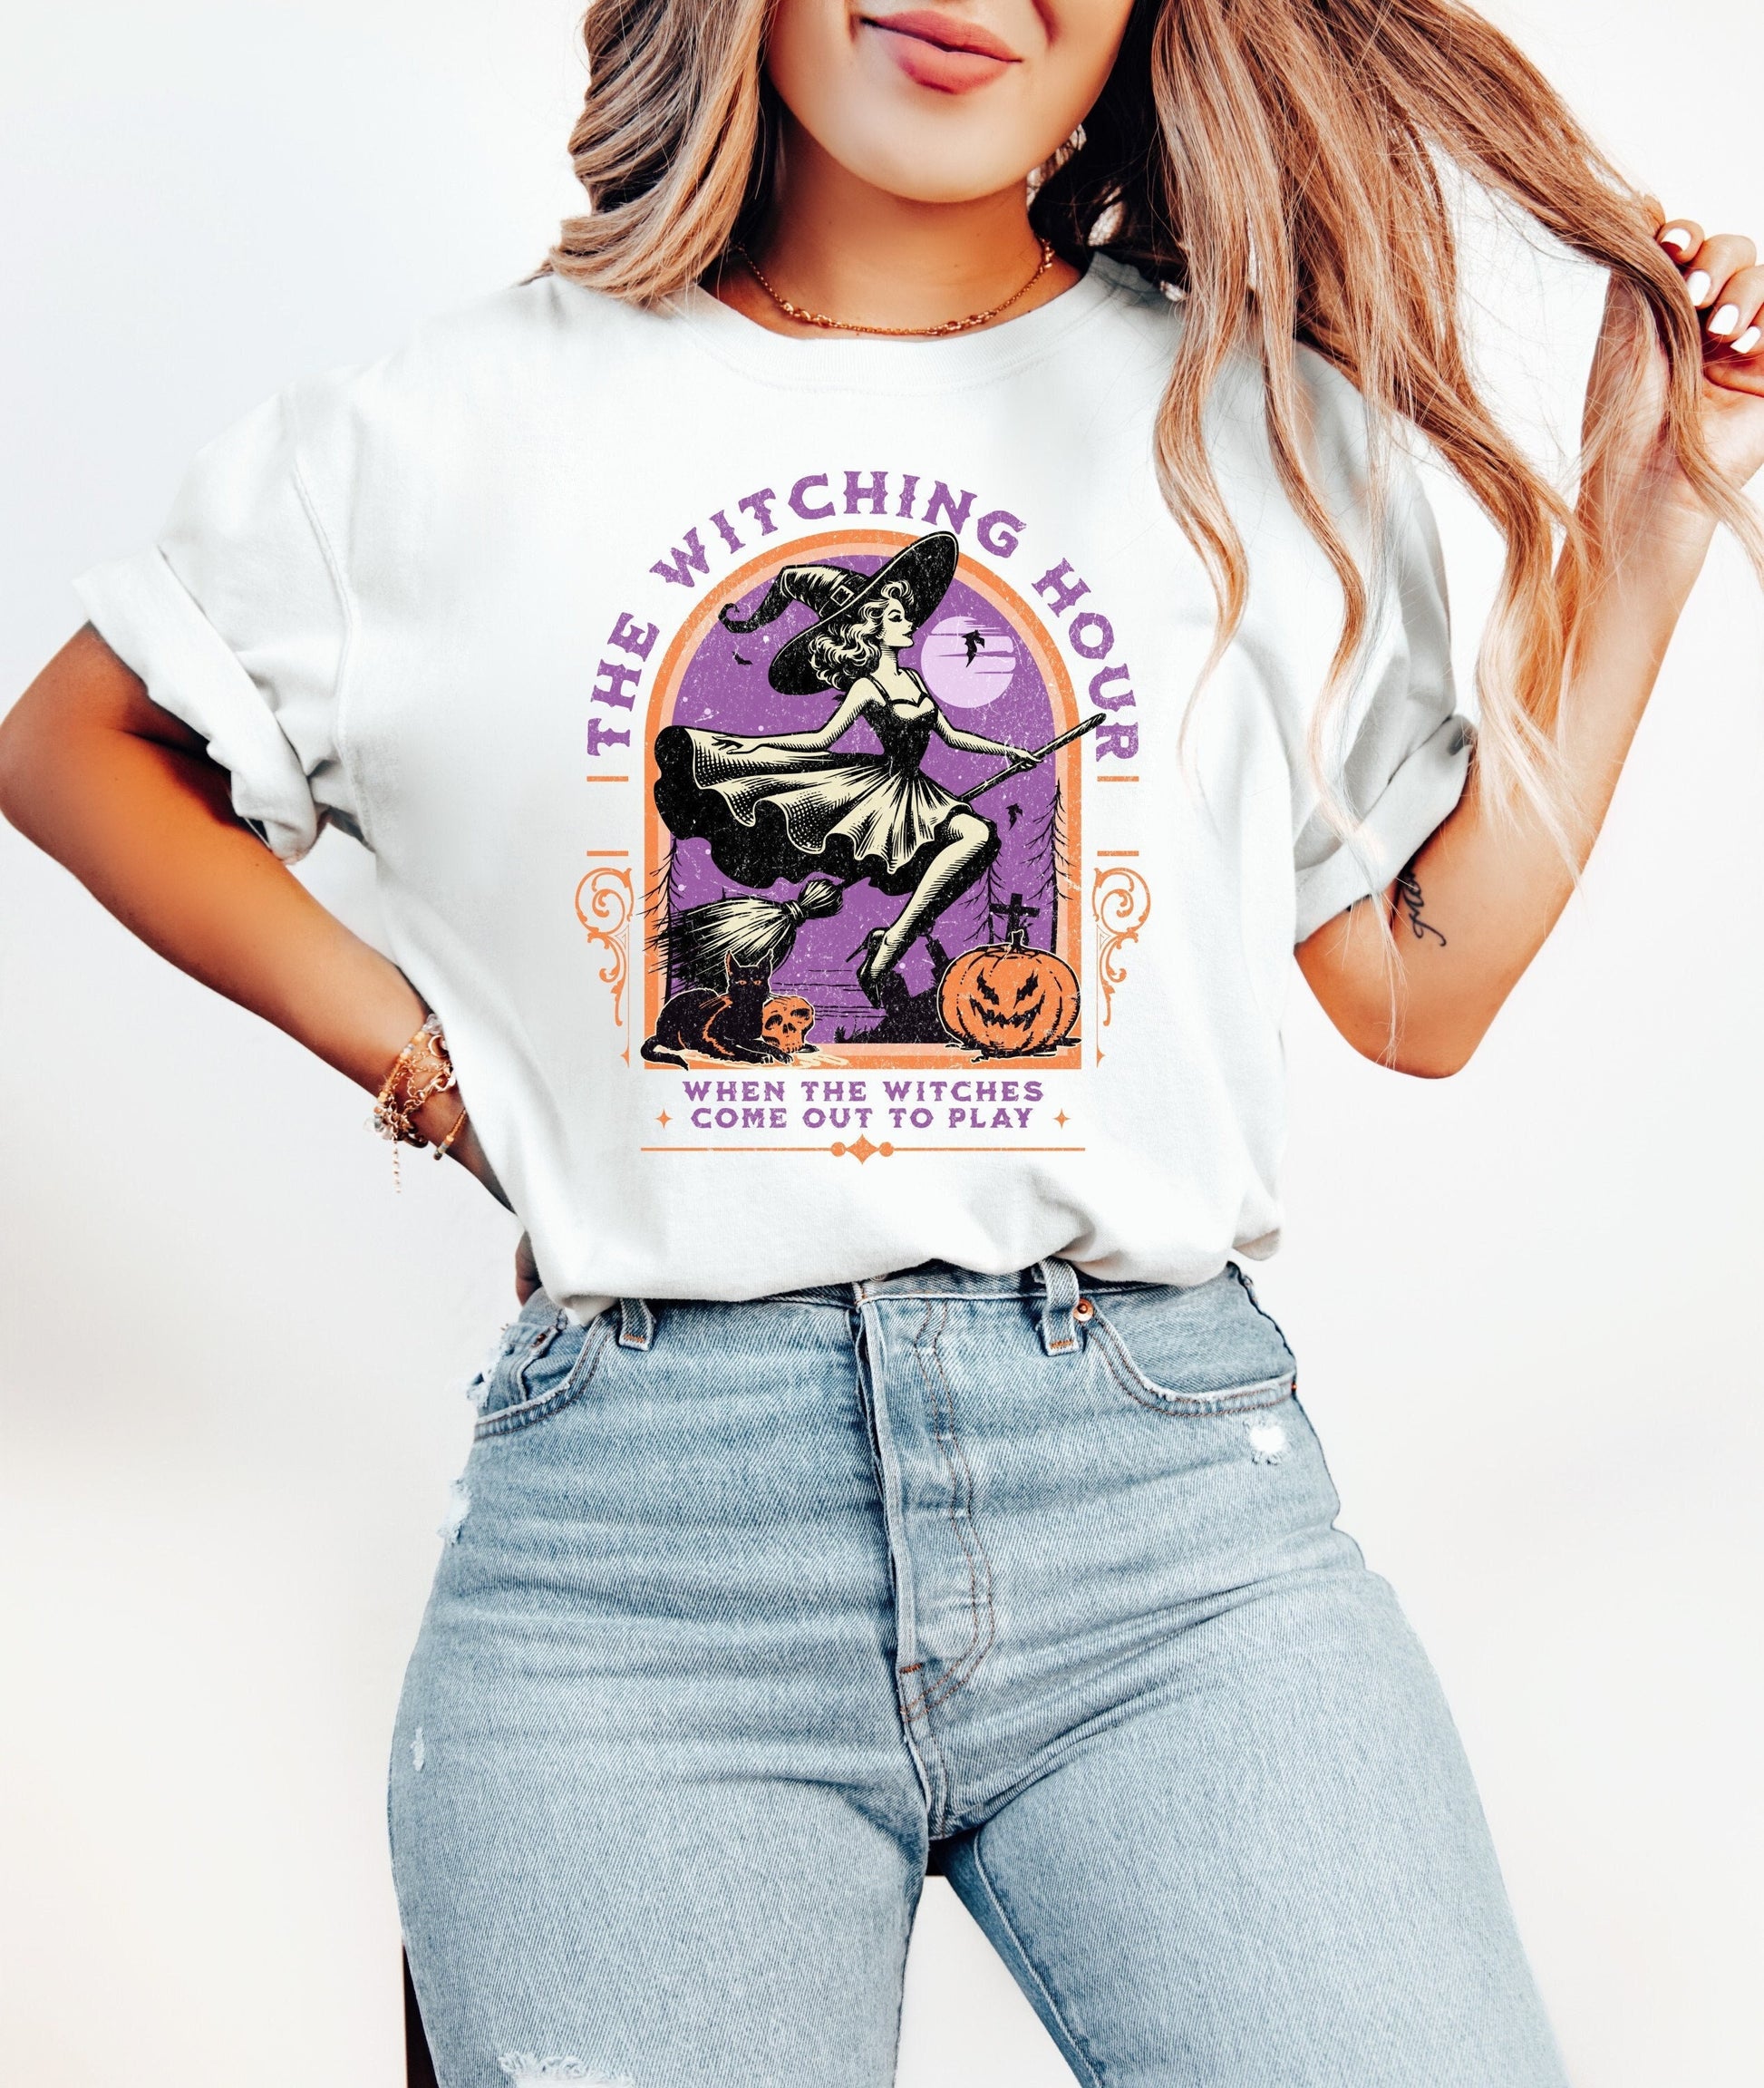 The Witching Hour Halloween Shirt, Cute Witch Halloween Shirt, Halloween Shirts, Spooky Season Shirt, Witches Halloween Top